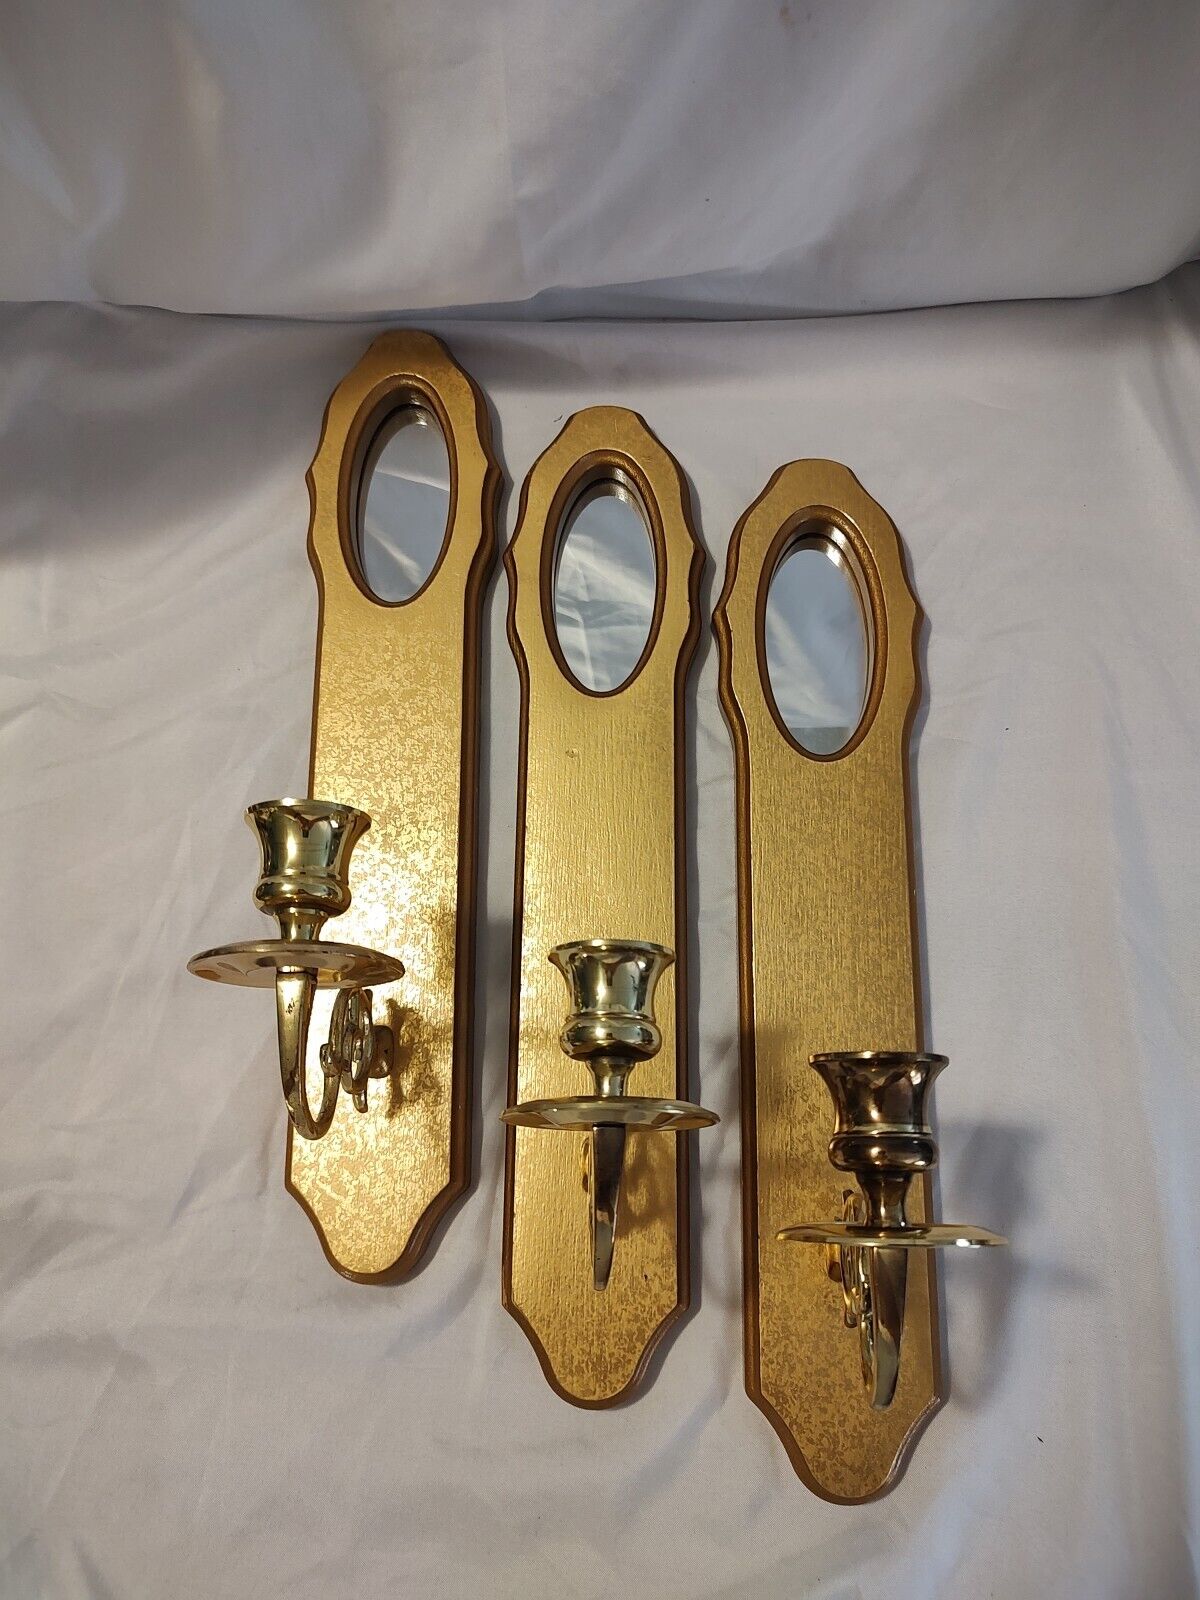 🔥3 Vintage Wall Hanging Faux Gold Leaf Wood Brass Mirror Candle Holders Sconces